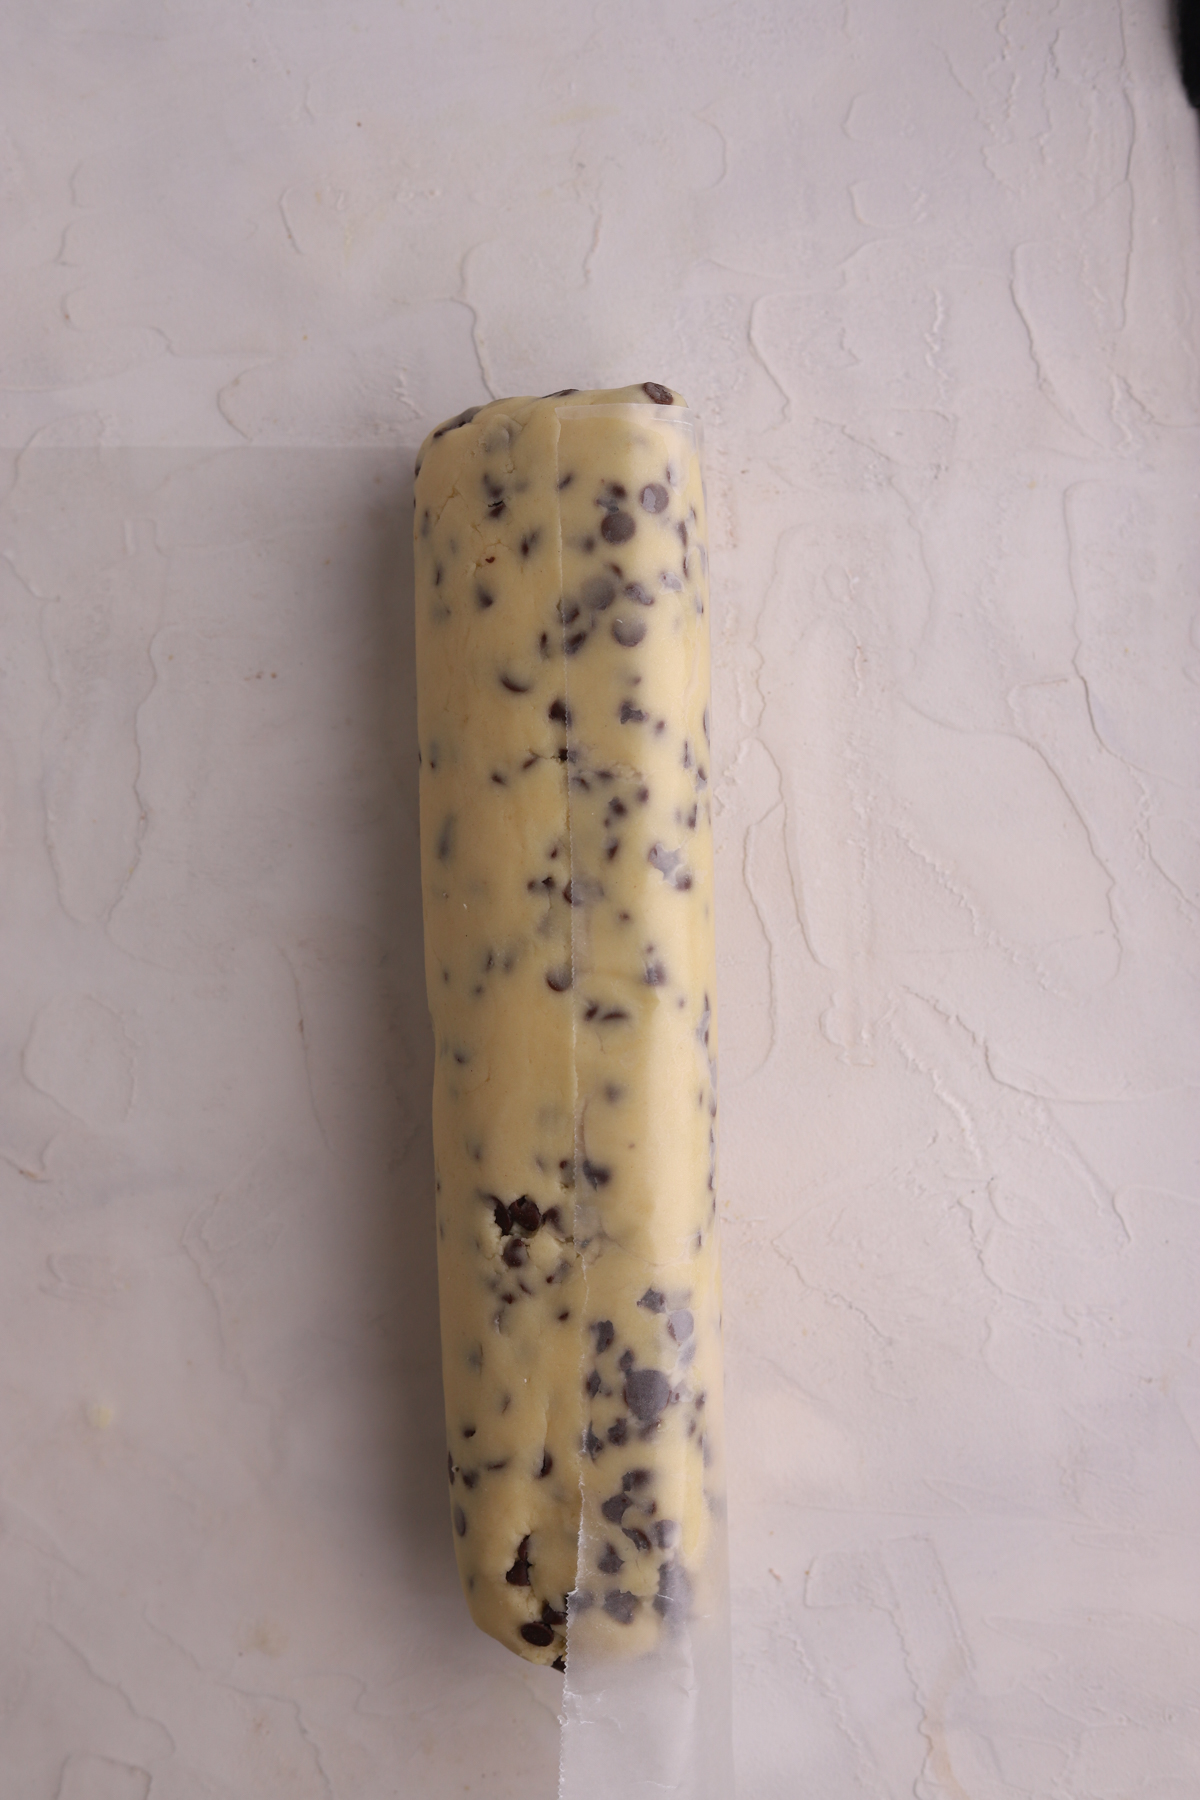 Chocolate chip cookie dough rolled into a log.